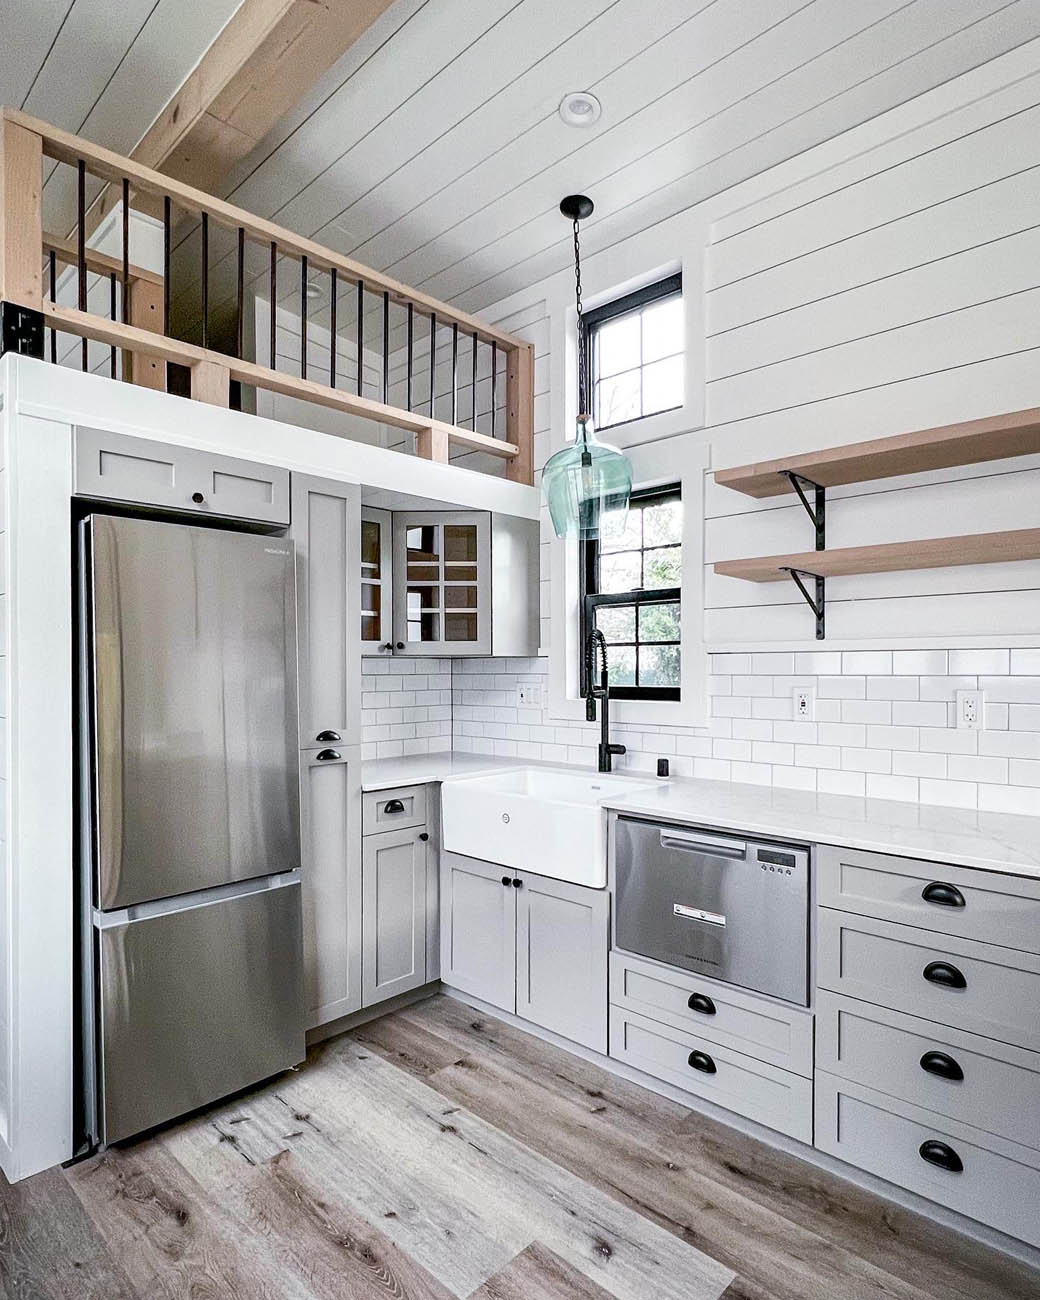 A Anchored Tiny Homes modern tiny home, build by our custom small home builder in Plano / Frisco.